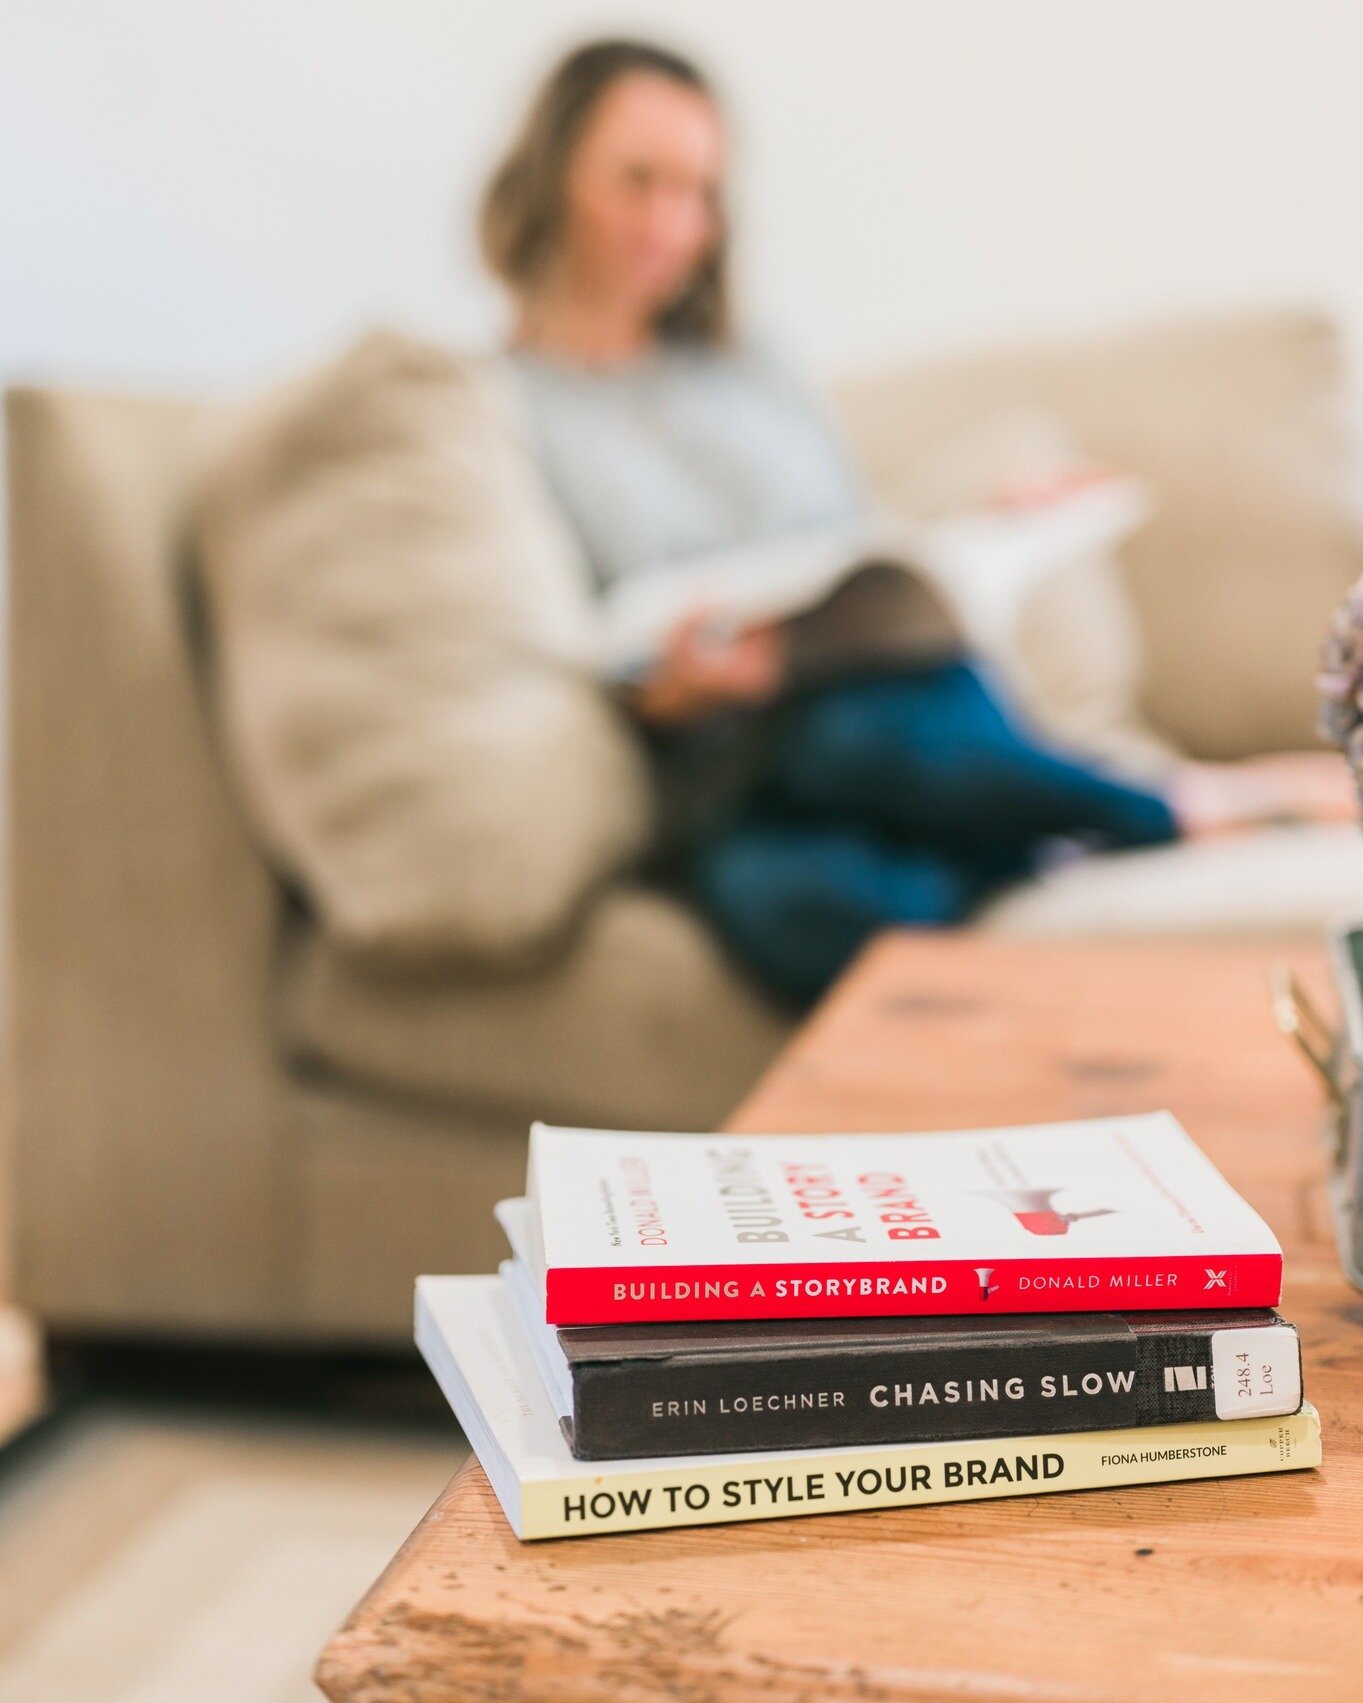 📚 Let's dive into some must-reads! When it comes to business and mindset, what are some of your favorites? Let's swap recommendations! 

#BookChat #BusinessMindset #MulberryCreativeCo